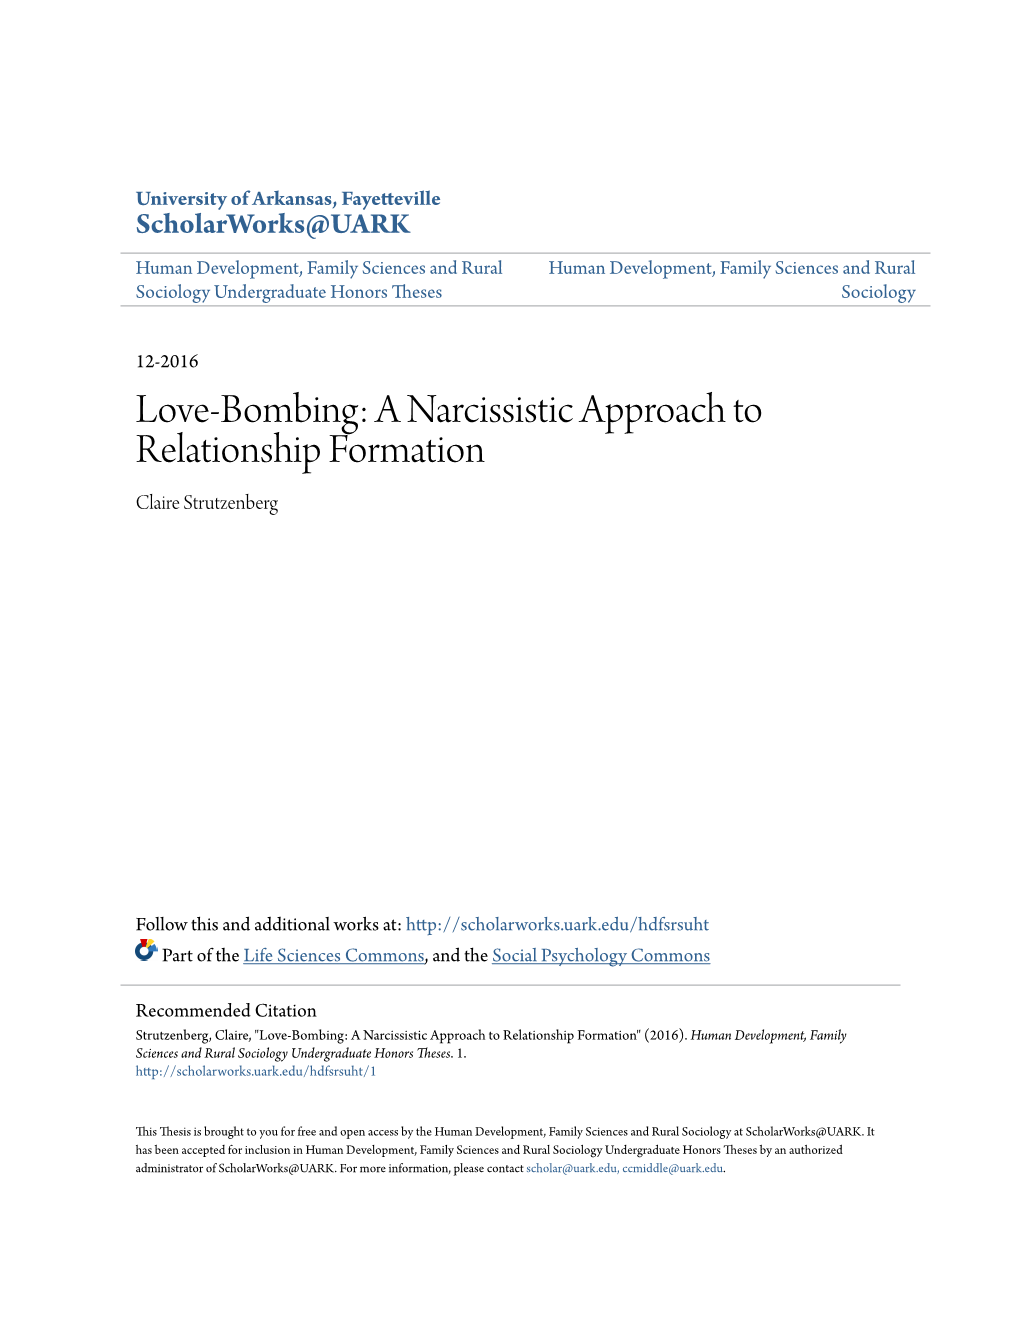 Love-Bombing: a Narcissistic Approach to Relationship Formation Claire Strutzenberg